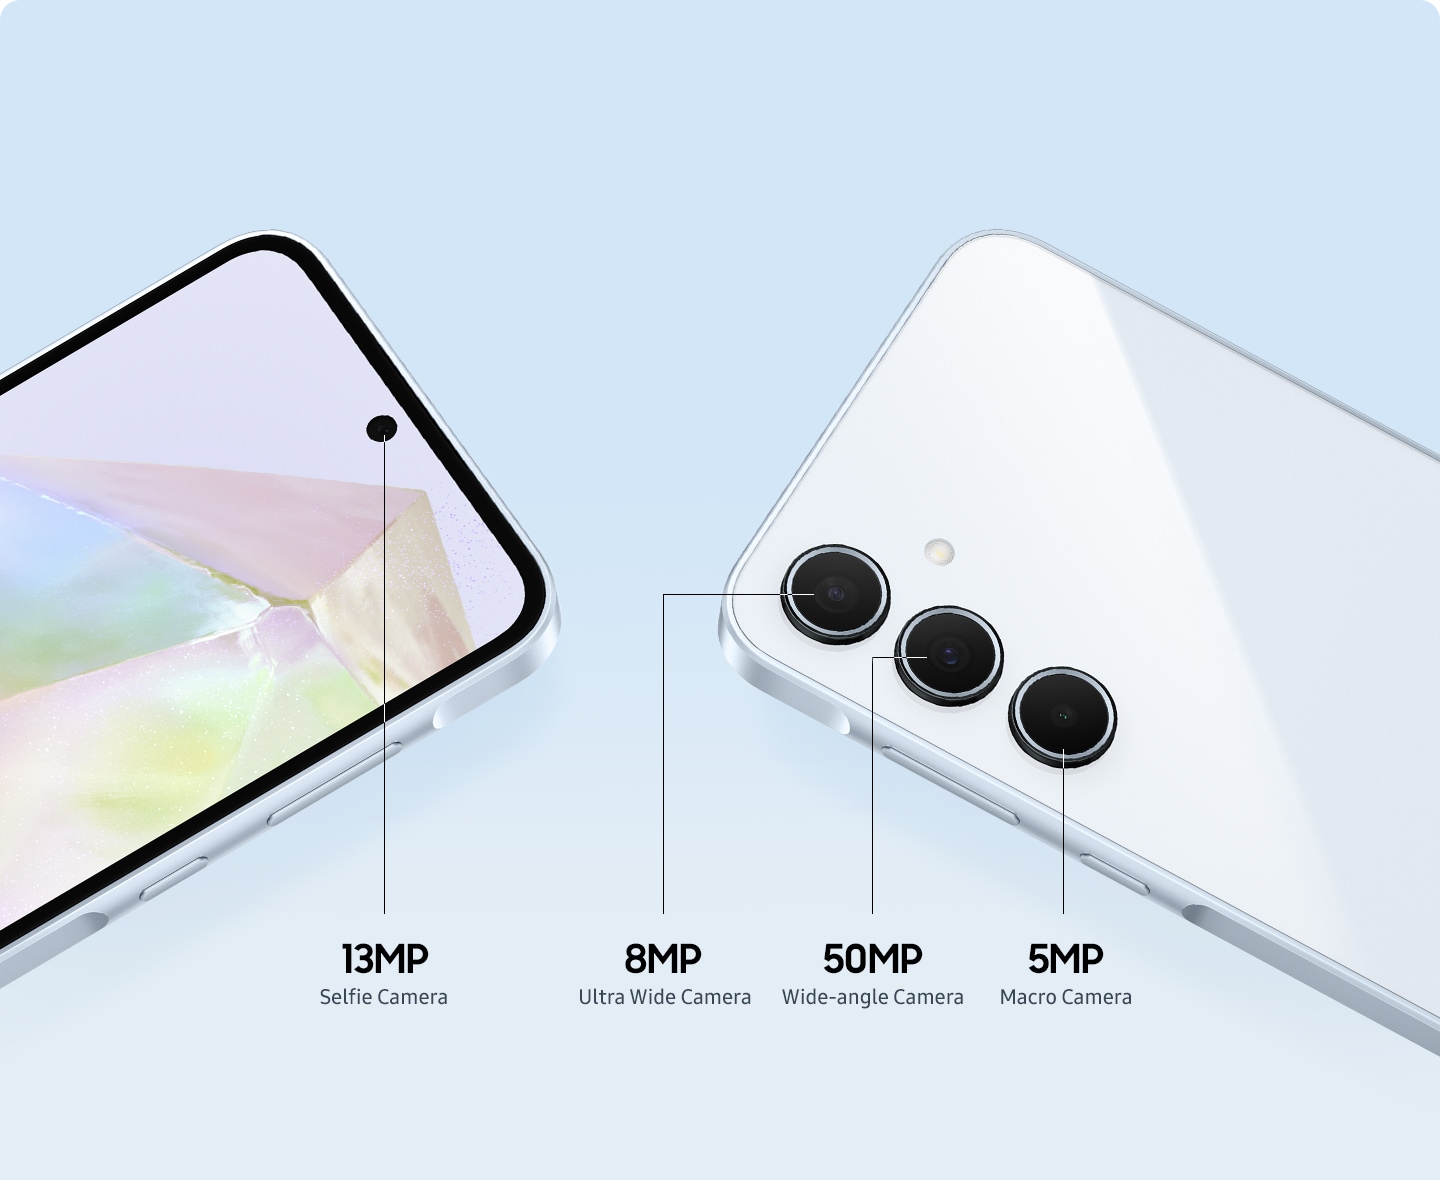 Close-up of the upper section of Galaxy A35 5G smartphones. Samsung Galaxy A35 specifications are 13MP selfie camera, a 8MP Ultra-Wide Camera, a 50MP Wide-angle Camera, and a 5MP Macro Camera.